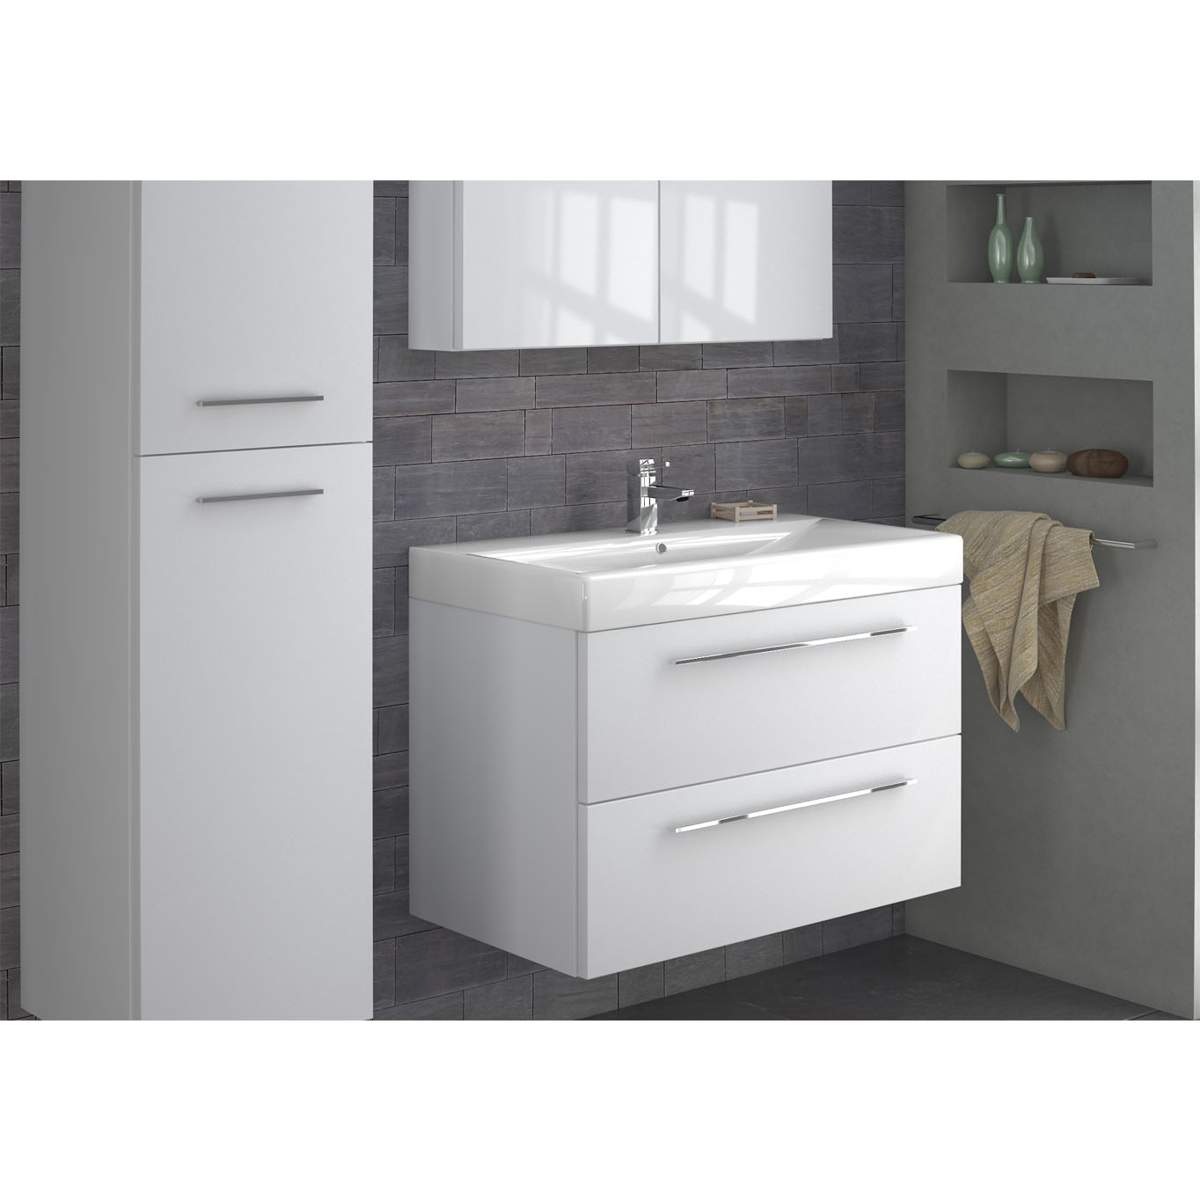 JTP Pace Units 600mm Wall Mounted Unit with Drawers and Basin in White (PWM603W + P600BS)